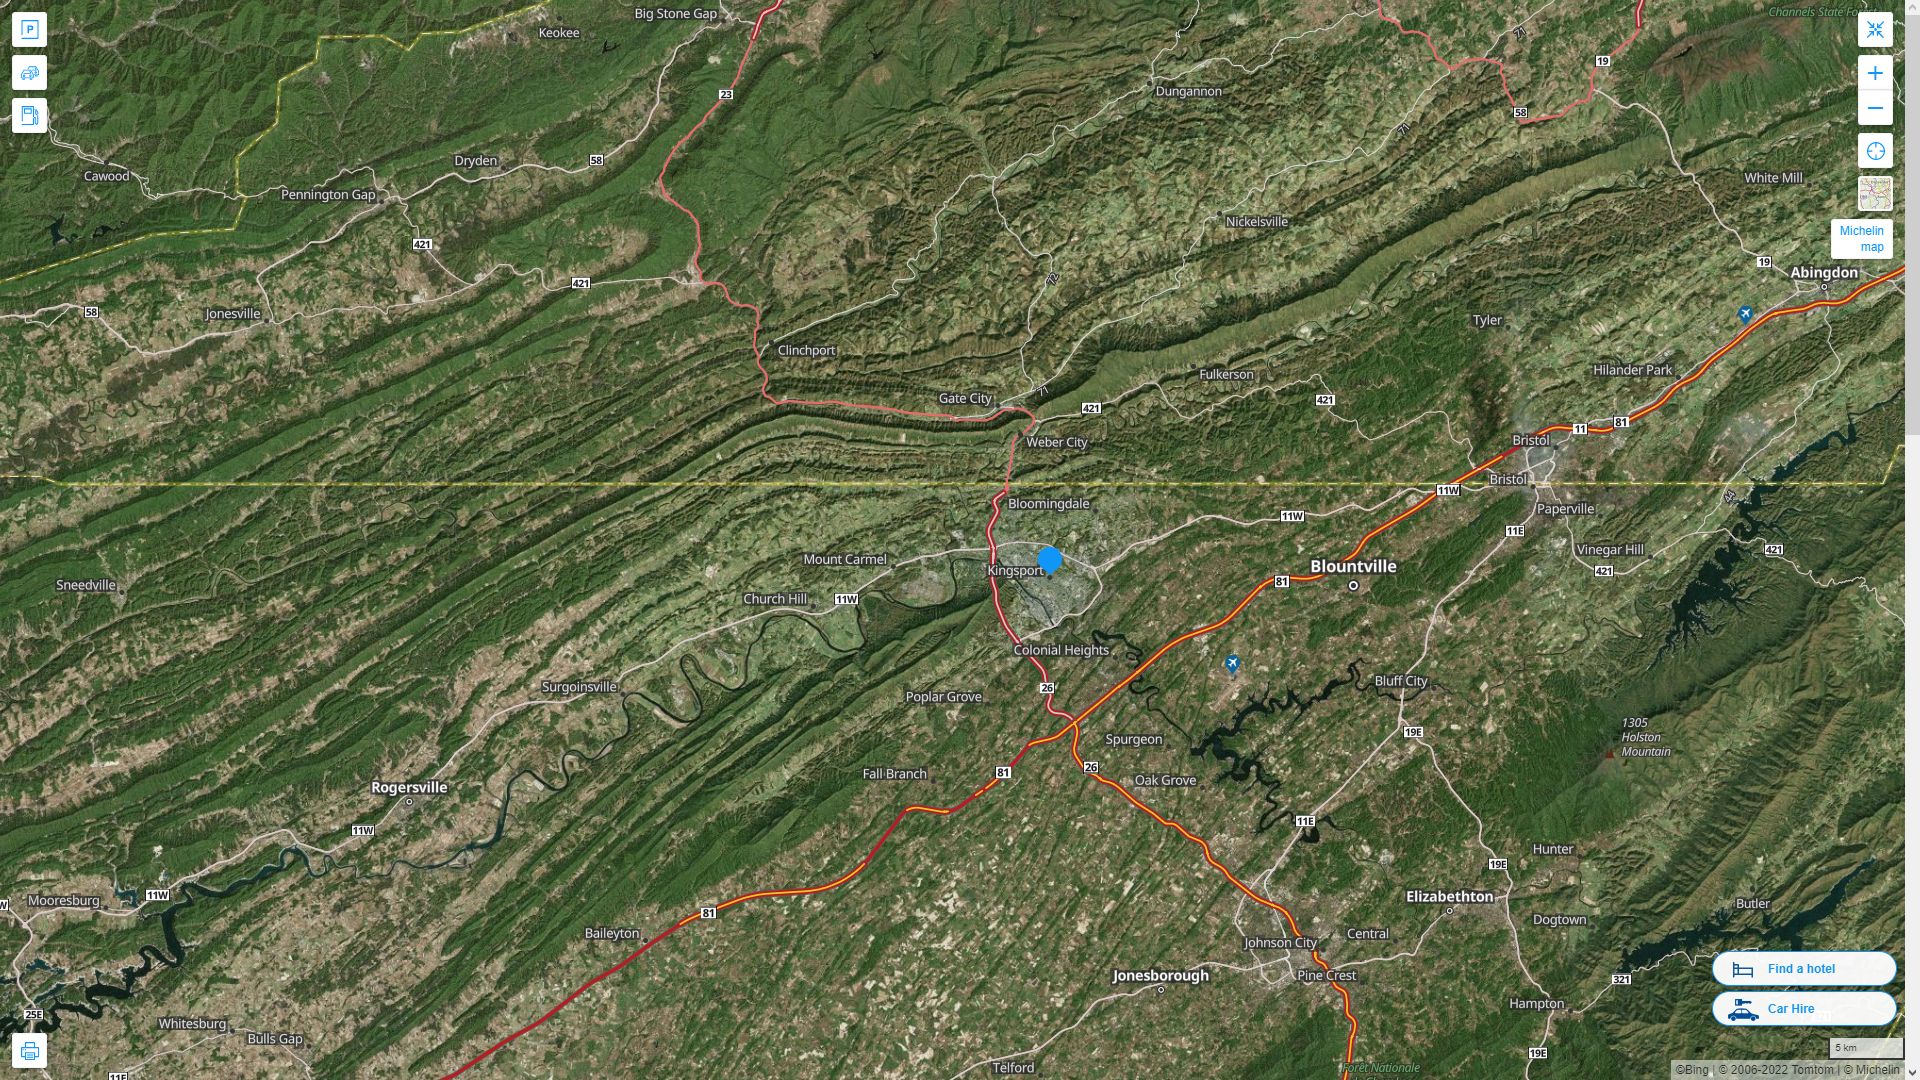 Kingsport Tennessee Highway and Road Map with Satellite View